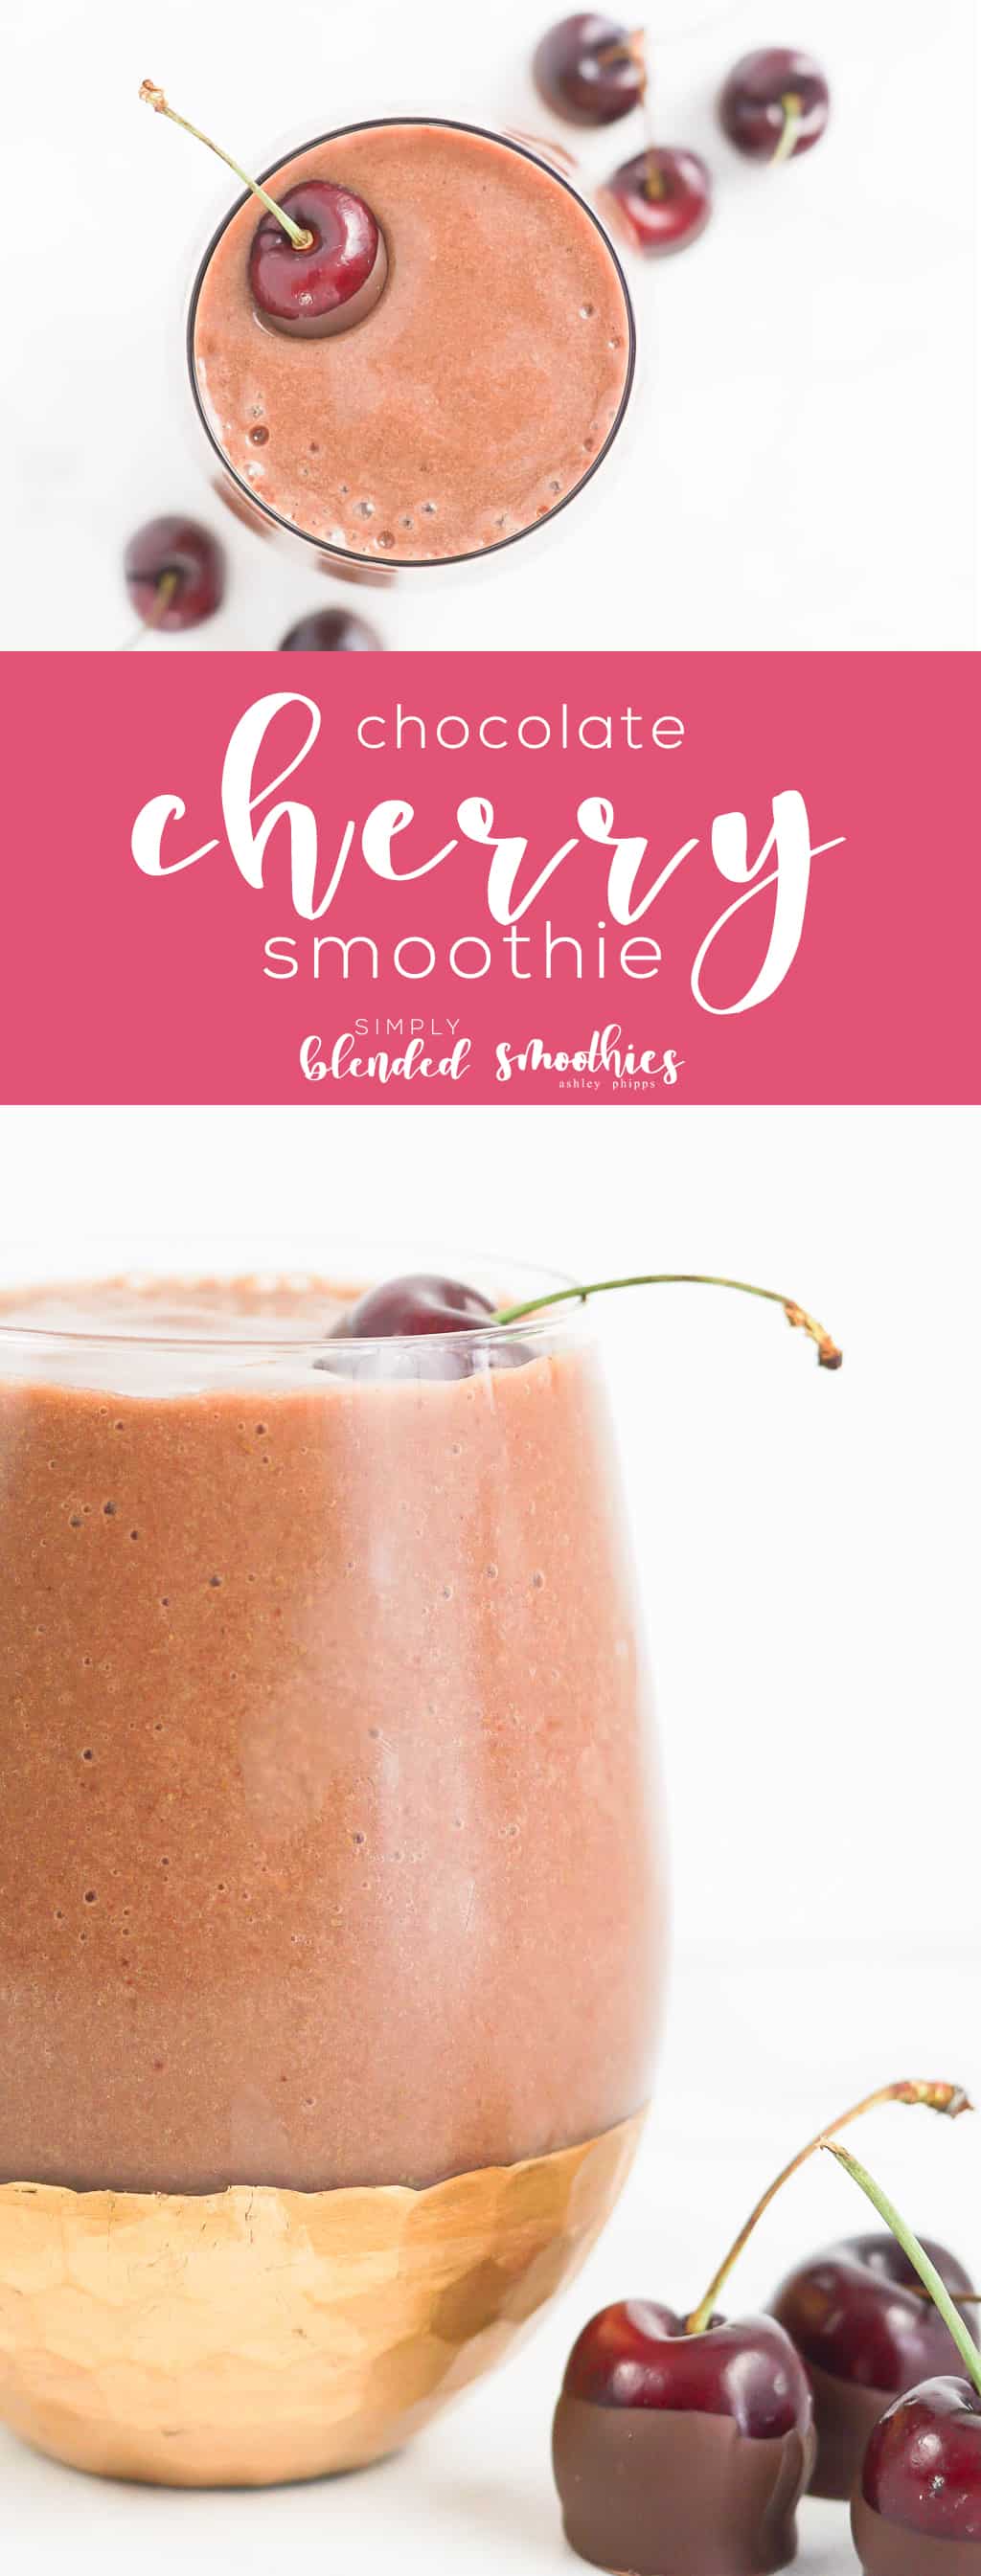 Chocolate Cherry Smoothie - A Scrumptious Cherry Smoothie With A Hint Of Chocolate That Is Delicious For Breakfast A Snack Or For Dessert